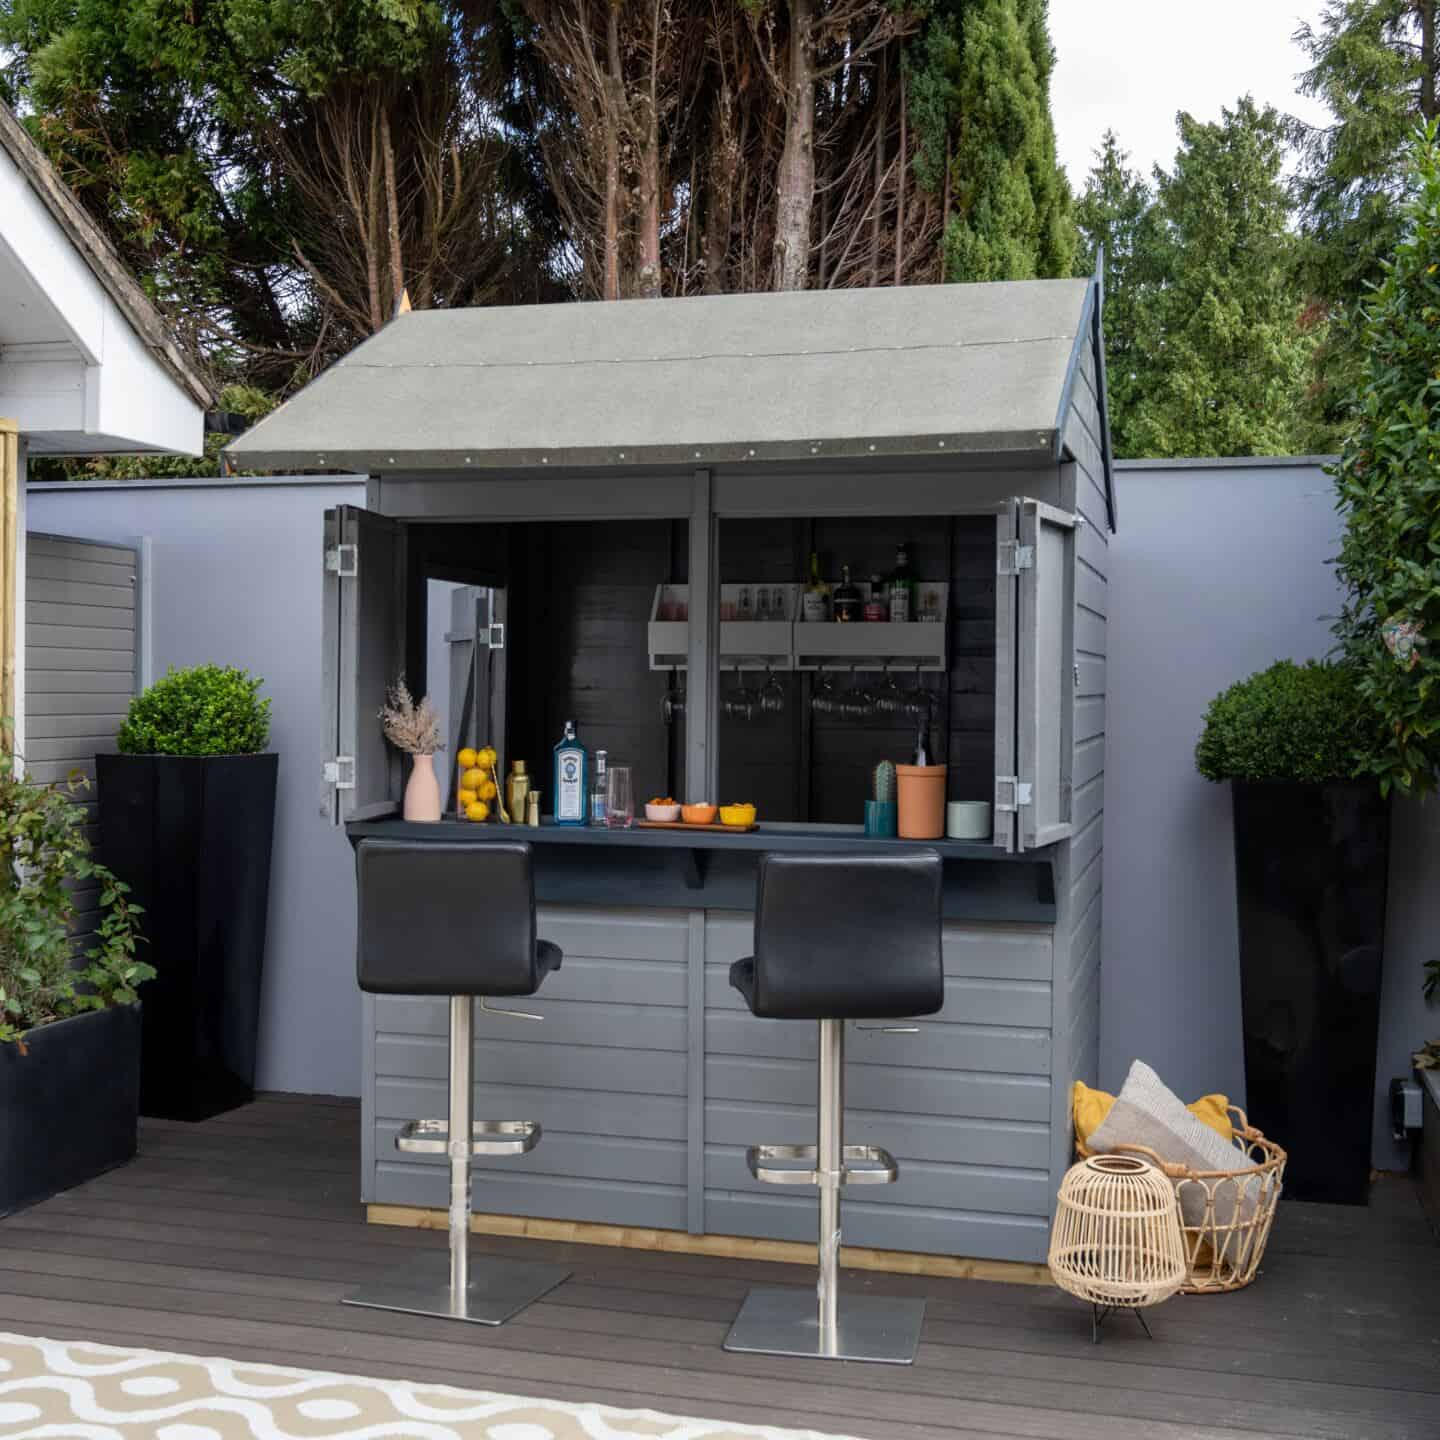 A garden shed painted grey and used as a bar